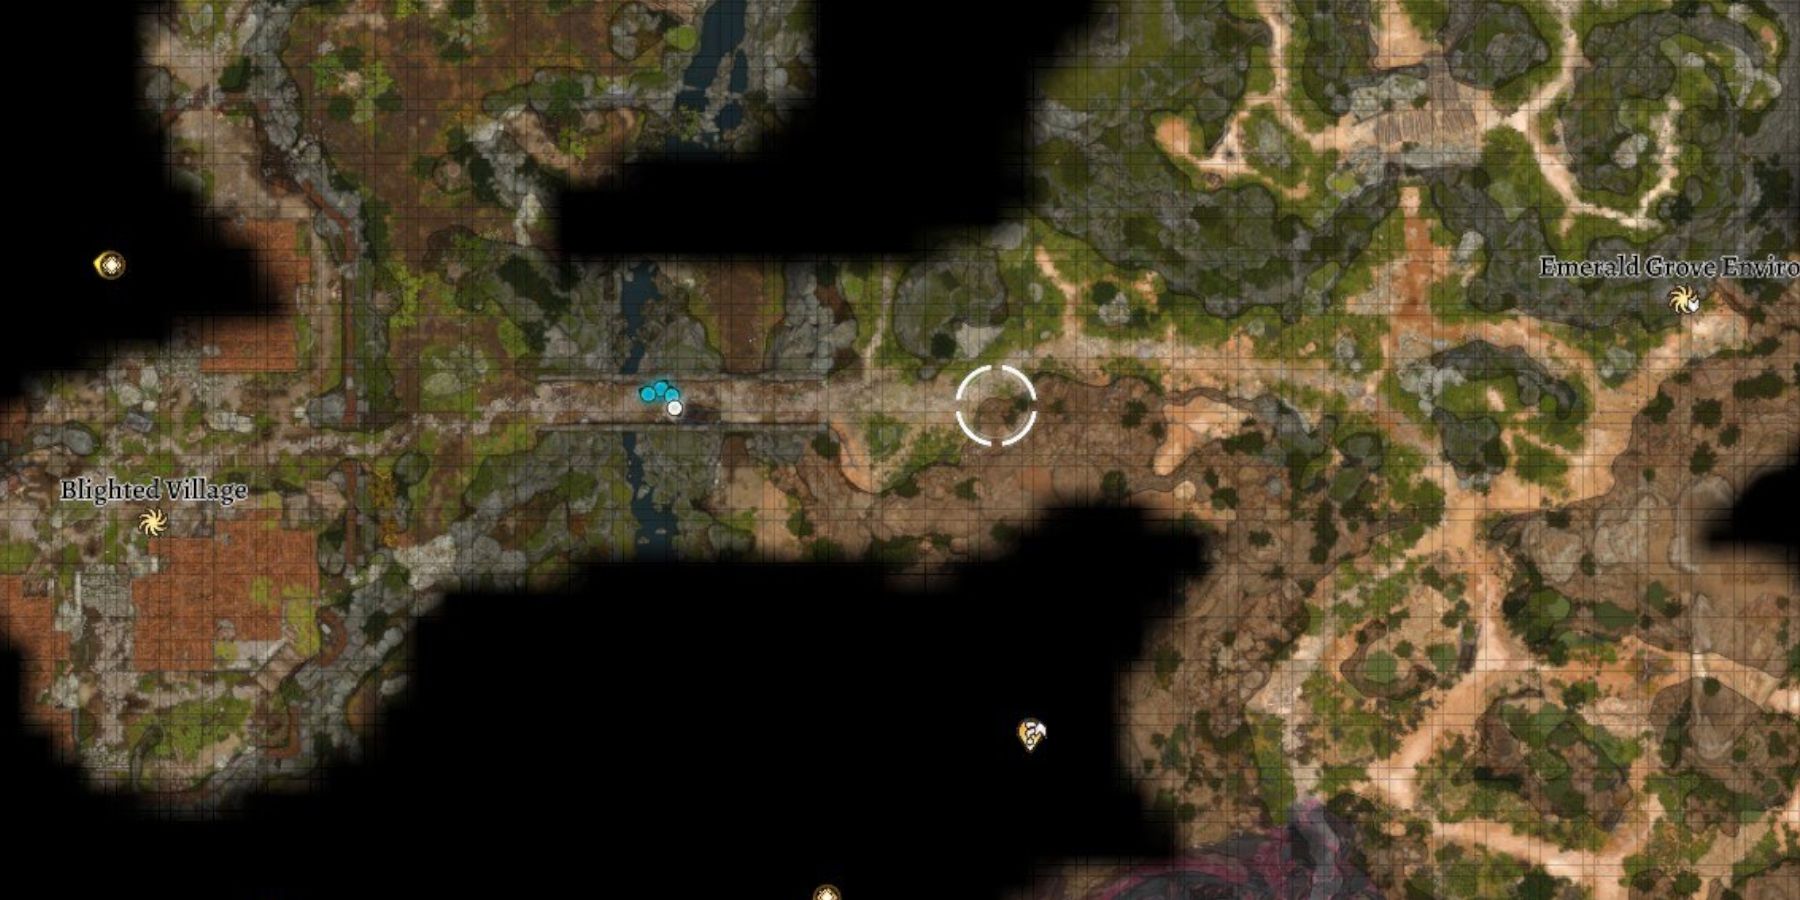 Baldur's Gate 3 - The location of the free shovel near the Blighted Village